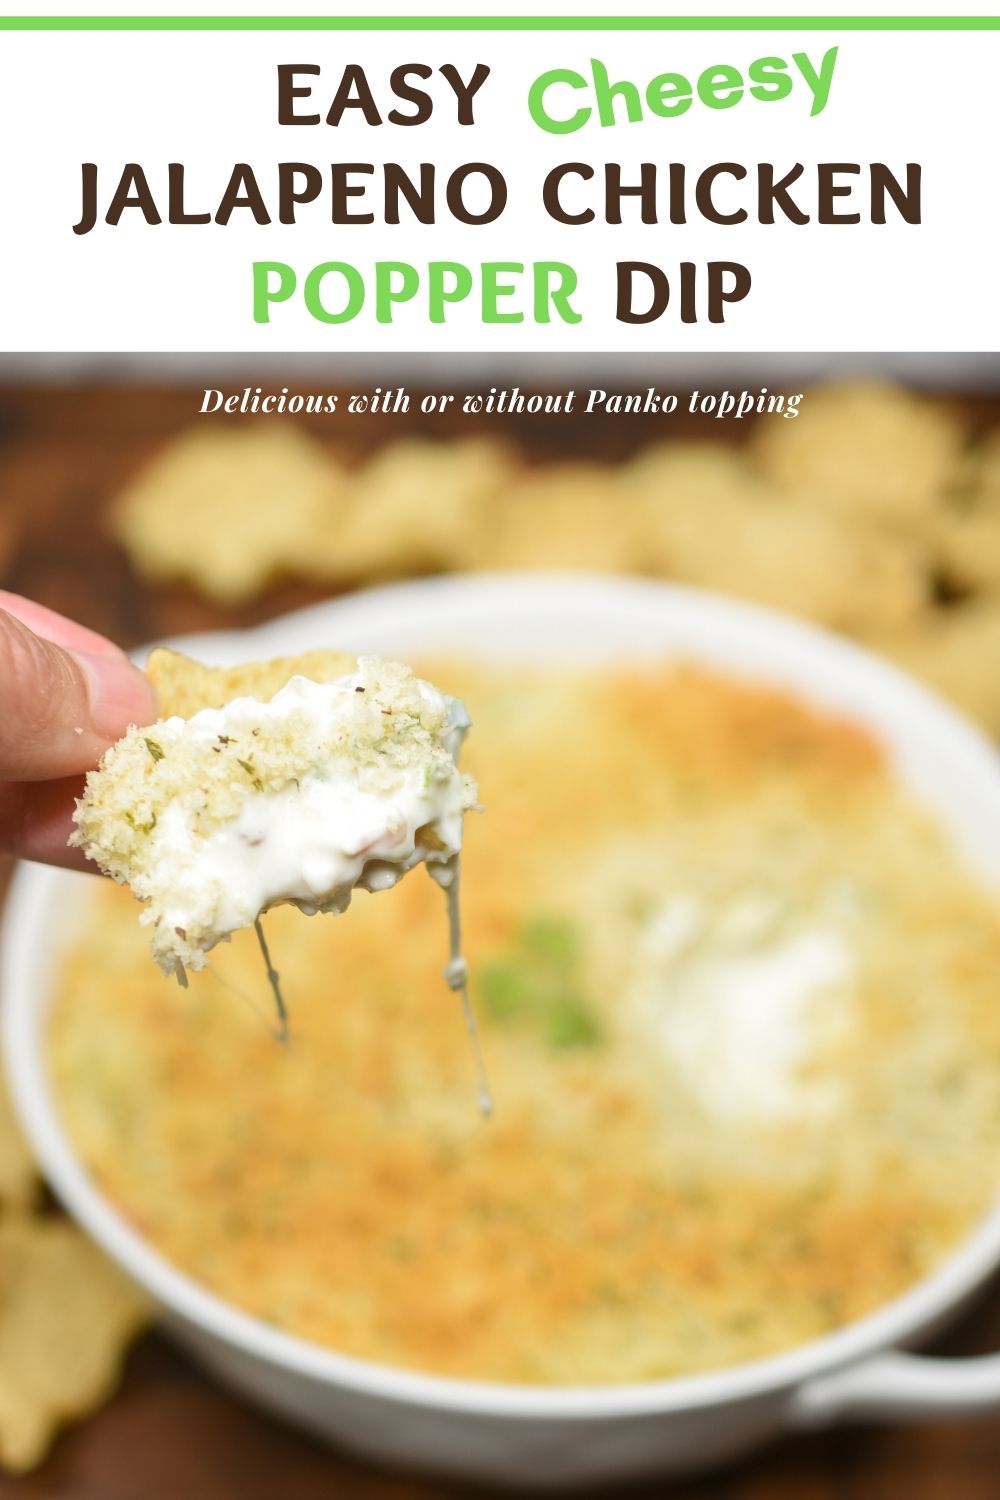 Jalapeno Chicken Popper dip with breadcrumbs